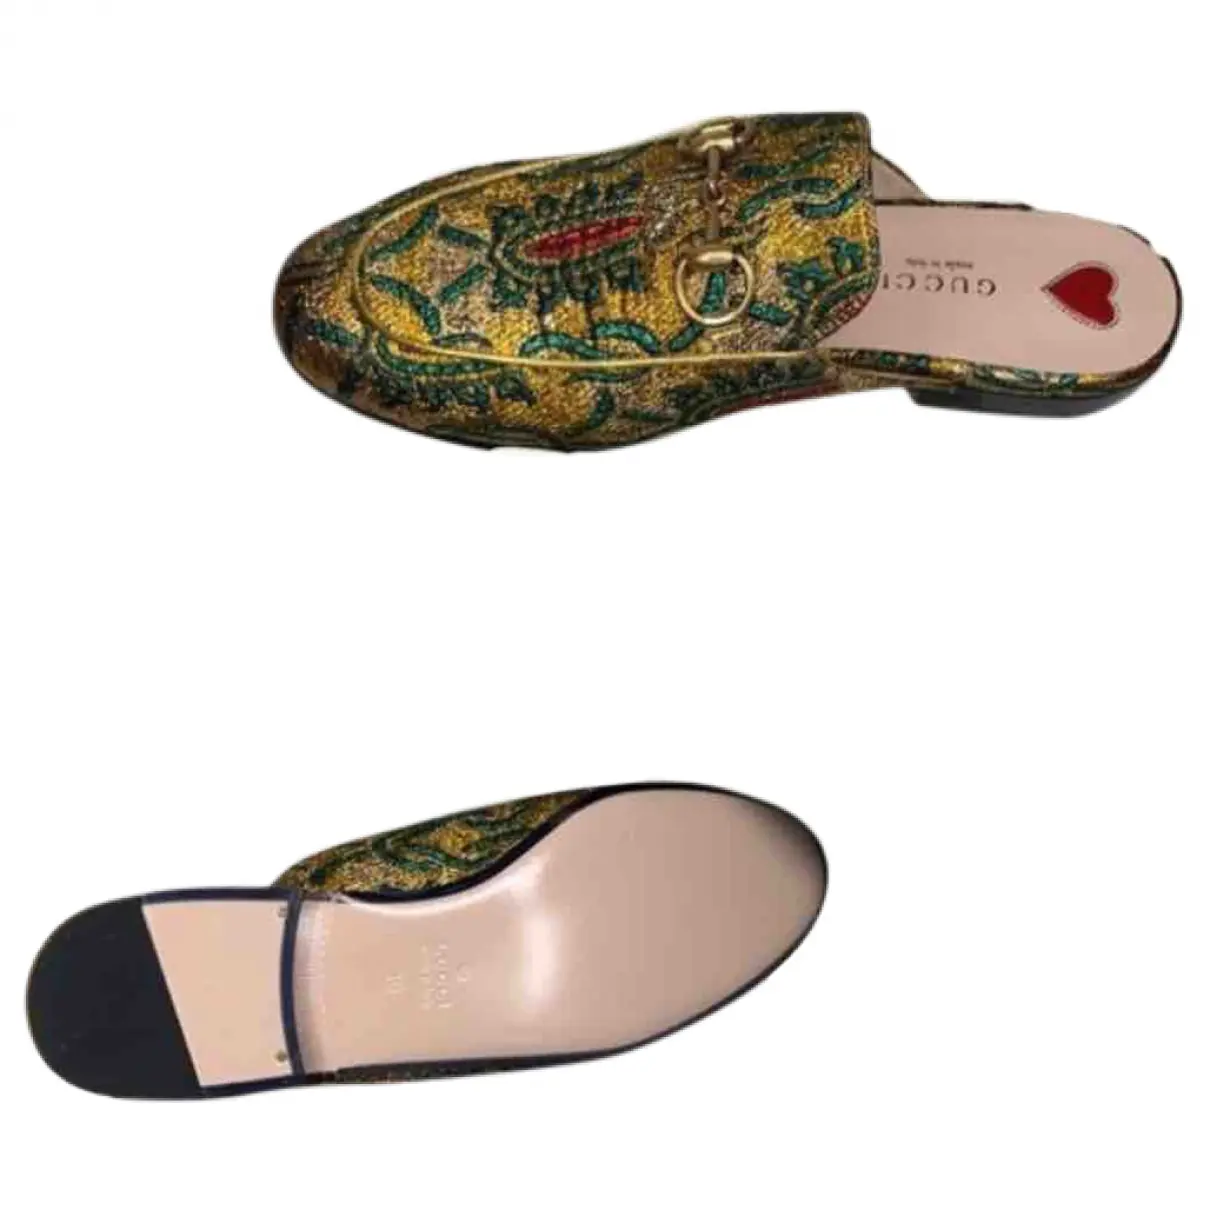 Gucci Princetown cloth flats for sale